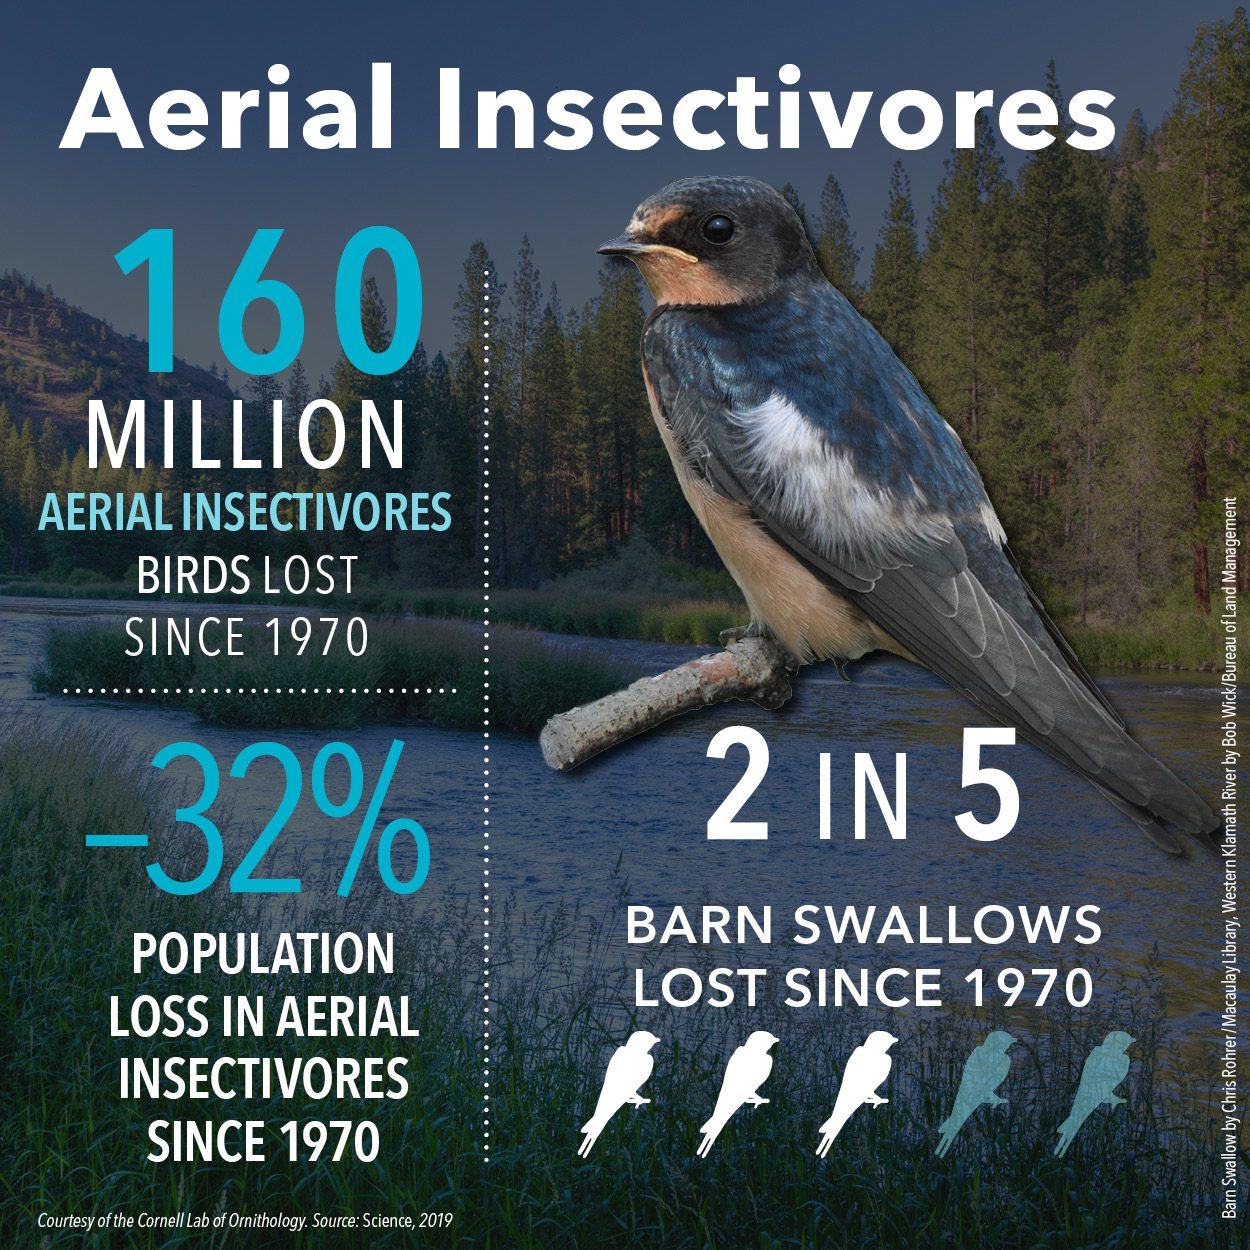 160 million aerial insectivores lost since 1970; -32% population loss. 2 in 5 Barn Swallows lost since 1970.